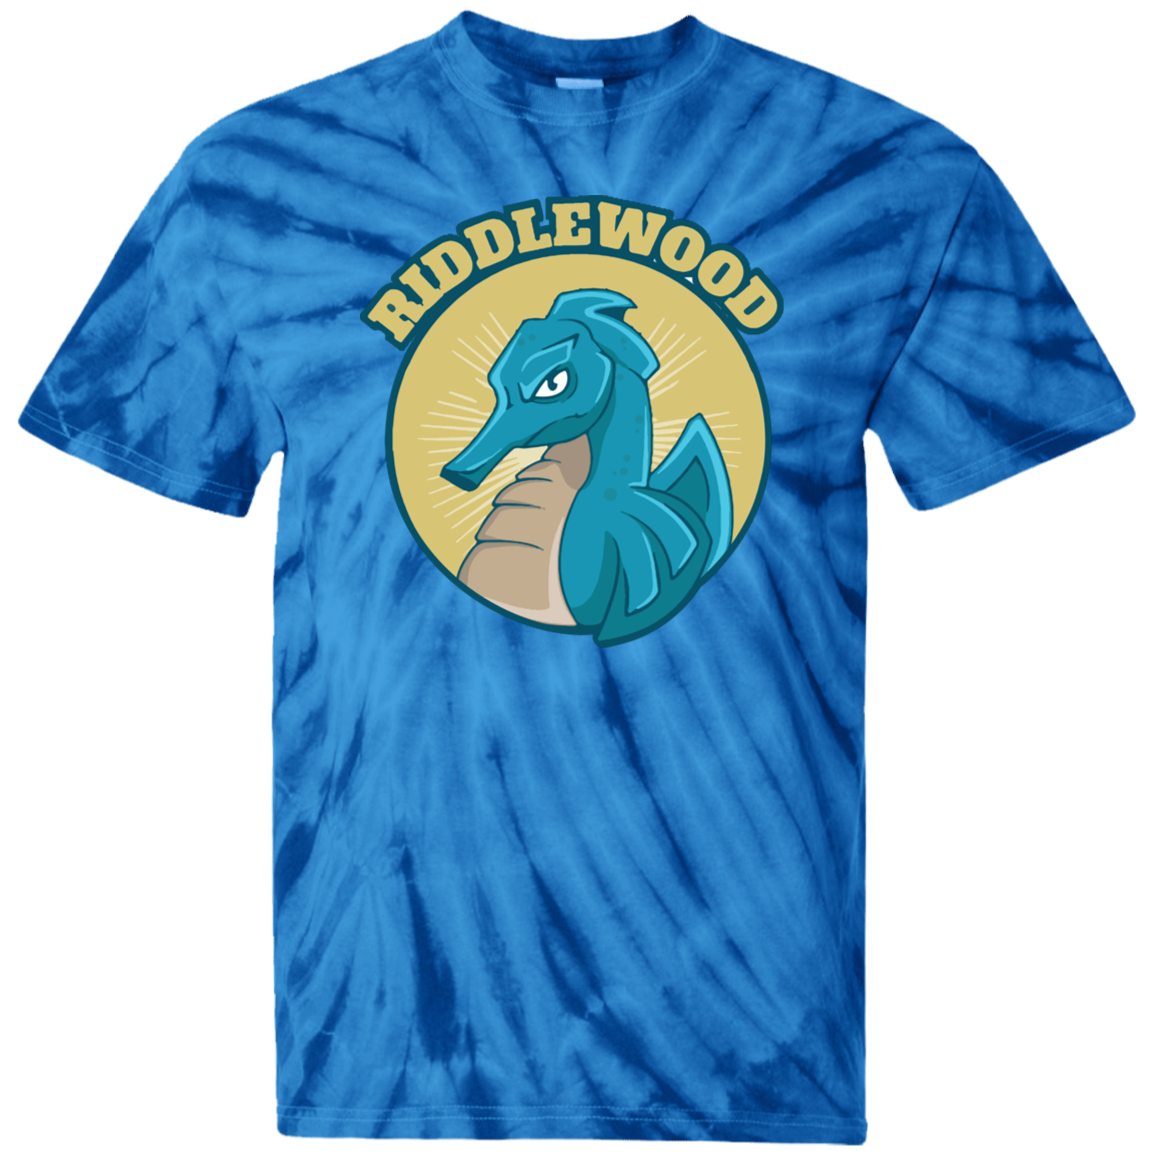 Riddlewood TeamStore Youth Tie Dye T-Shirt